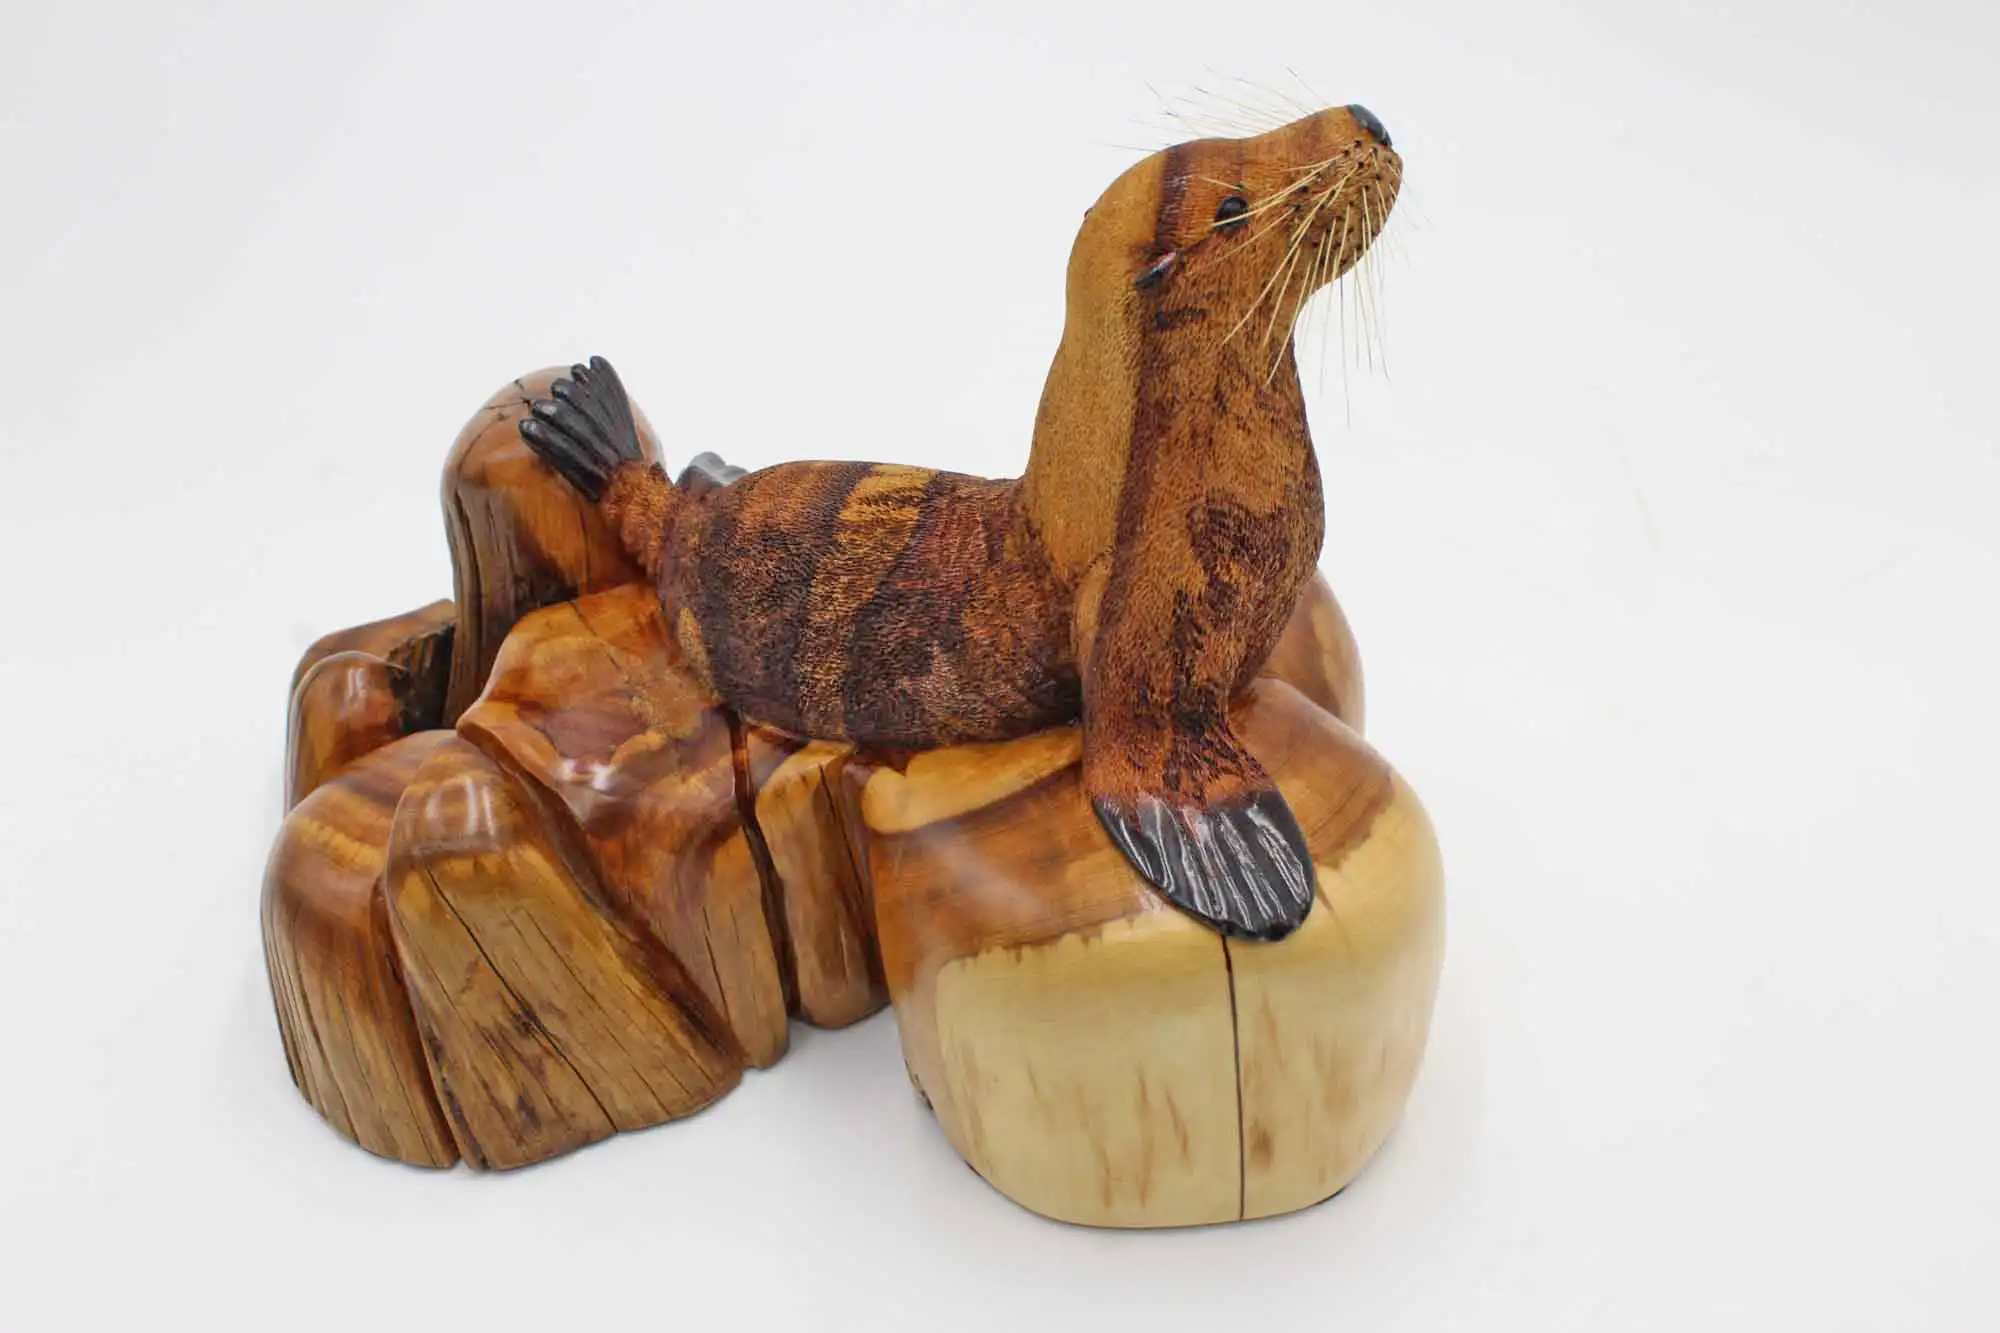 Spelted Sea Lion woodcarving sculpture